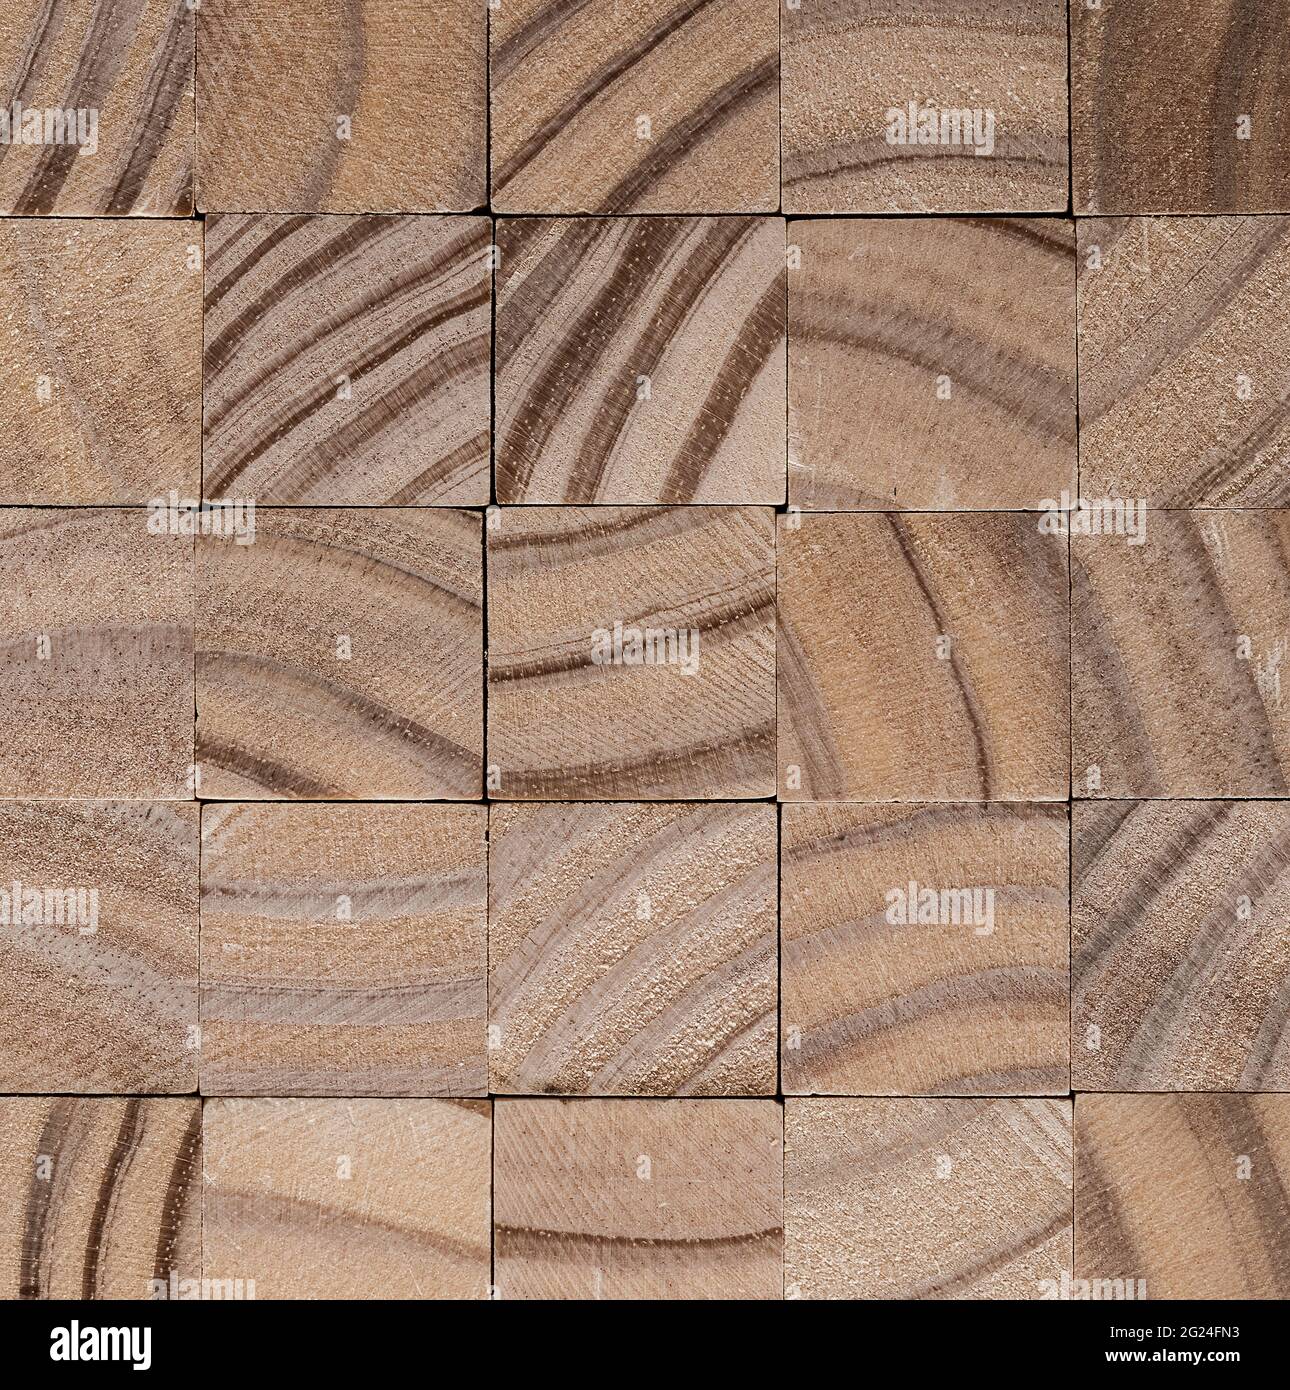 top view of wooden cubes or blocks, full frame background Stock Photo